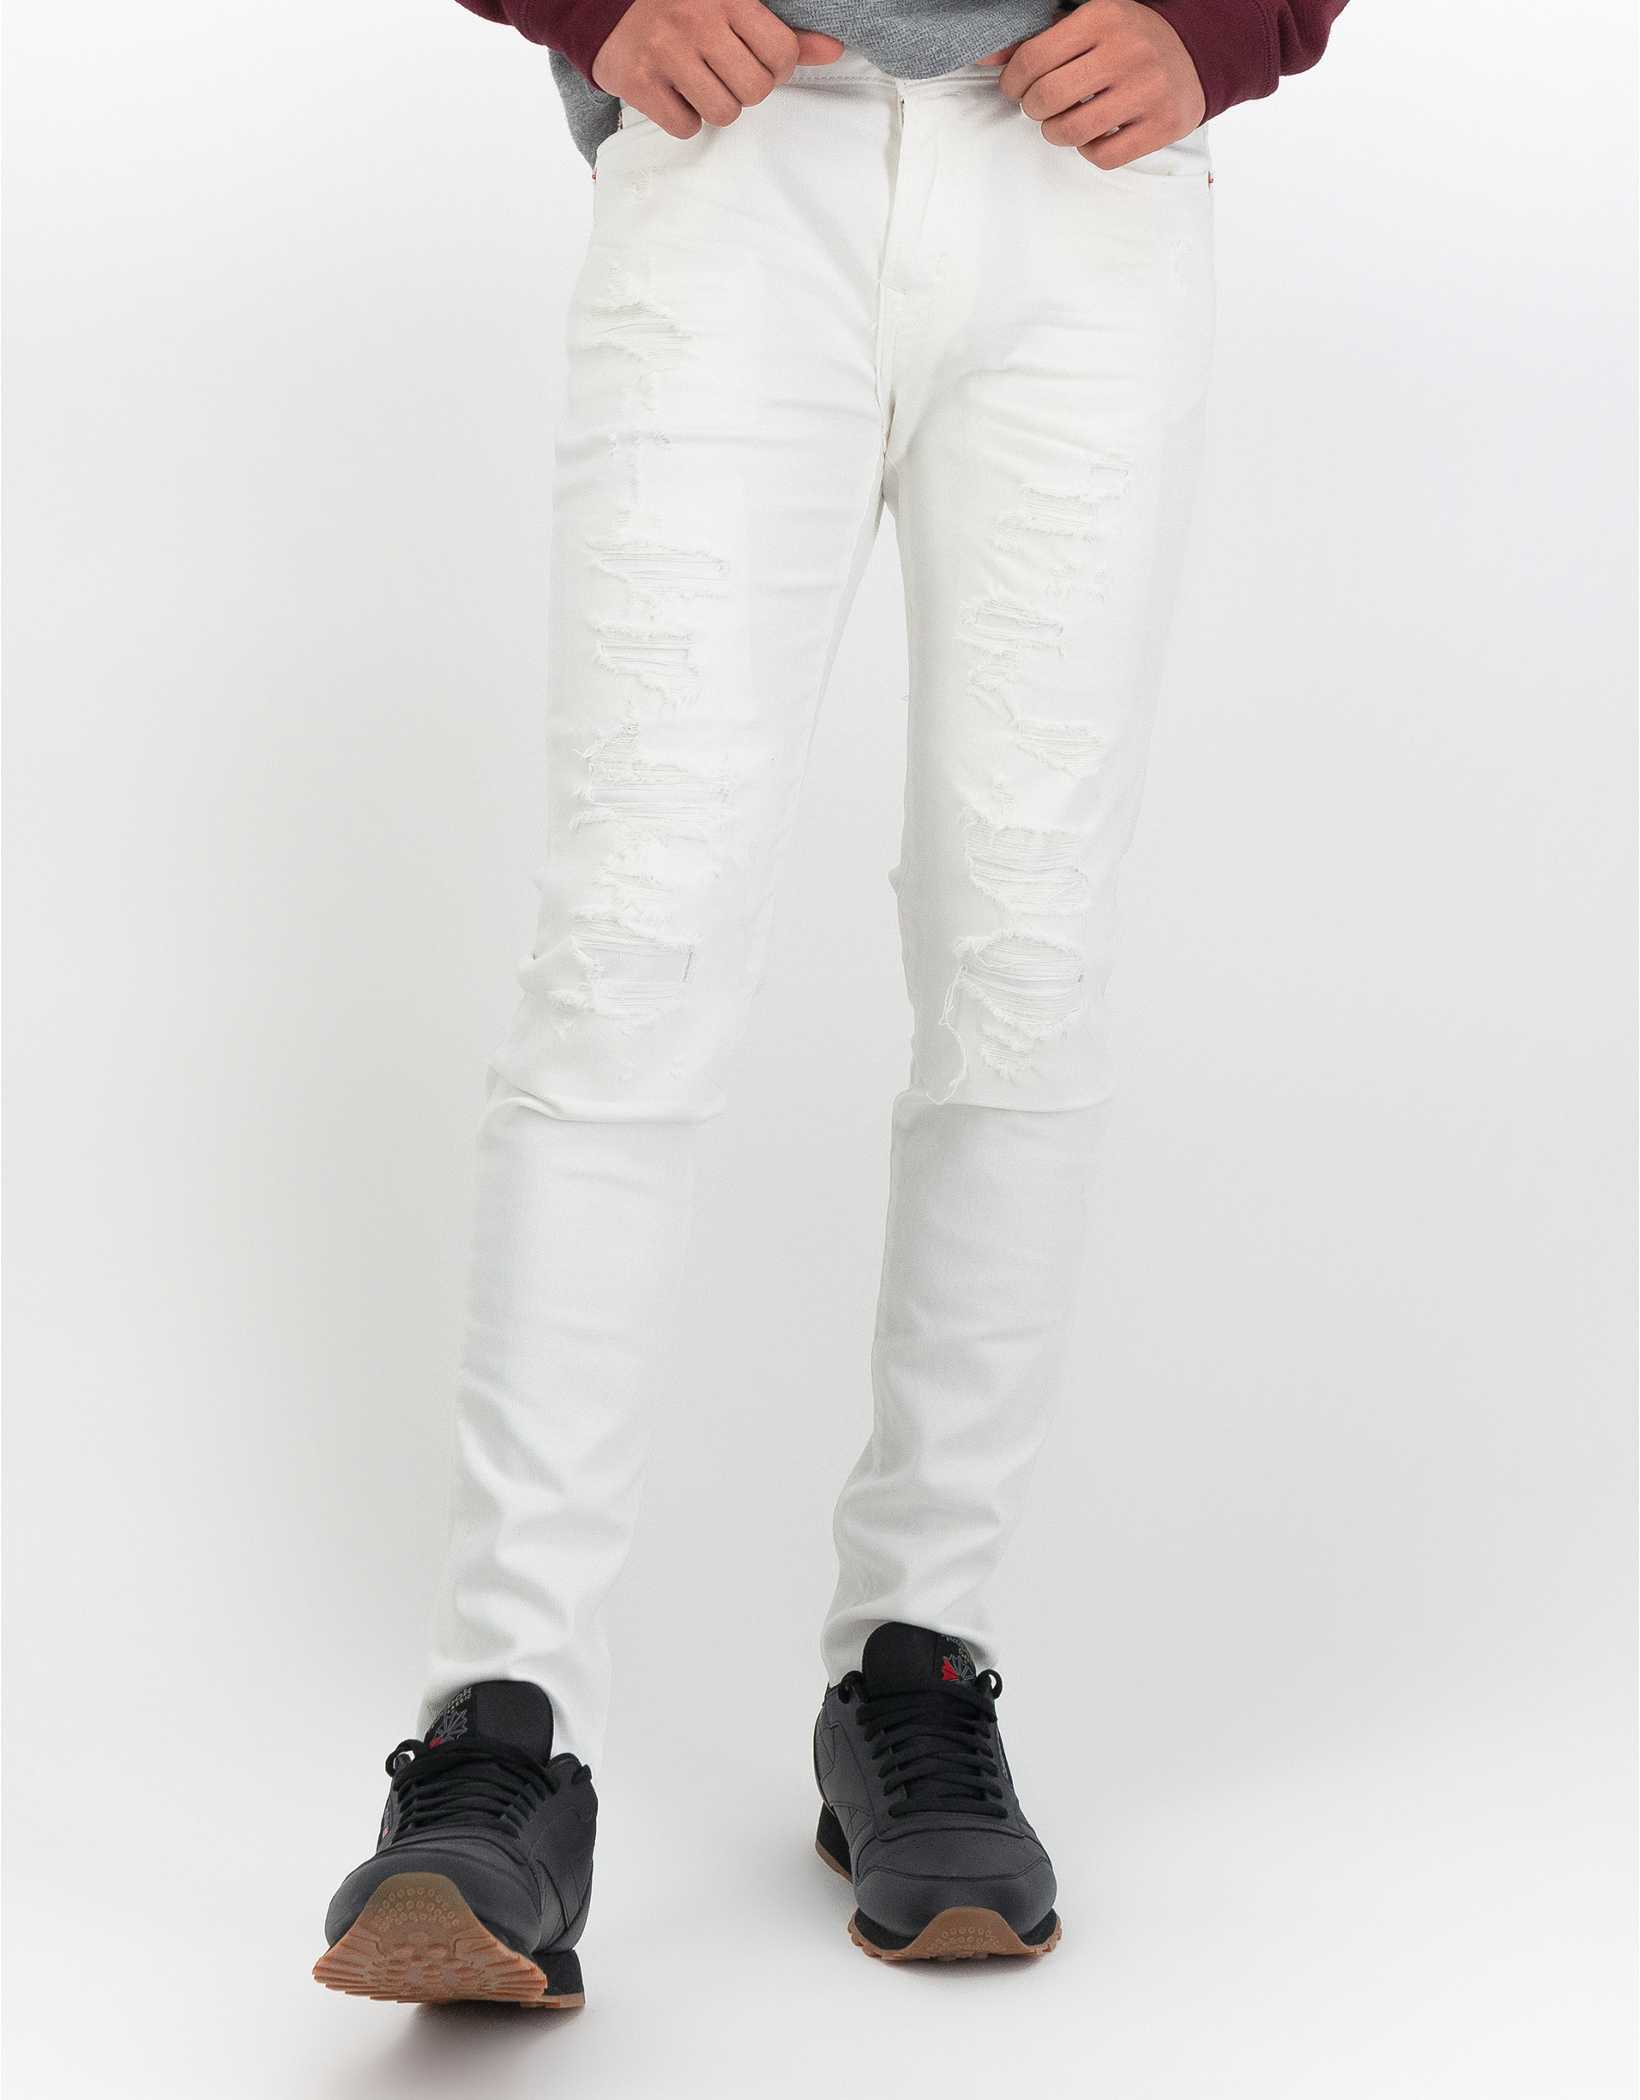 AirFlex  Patched Skinny Jean